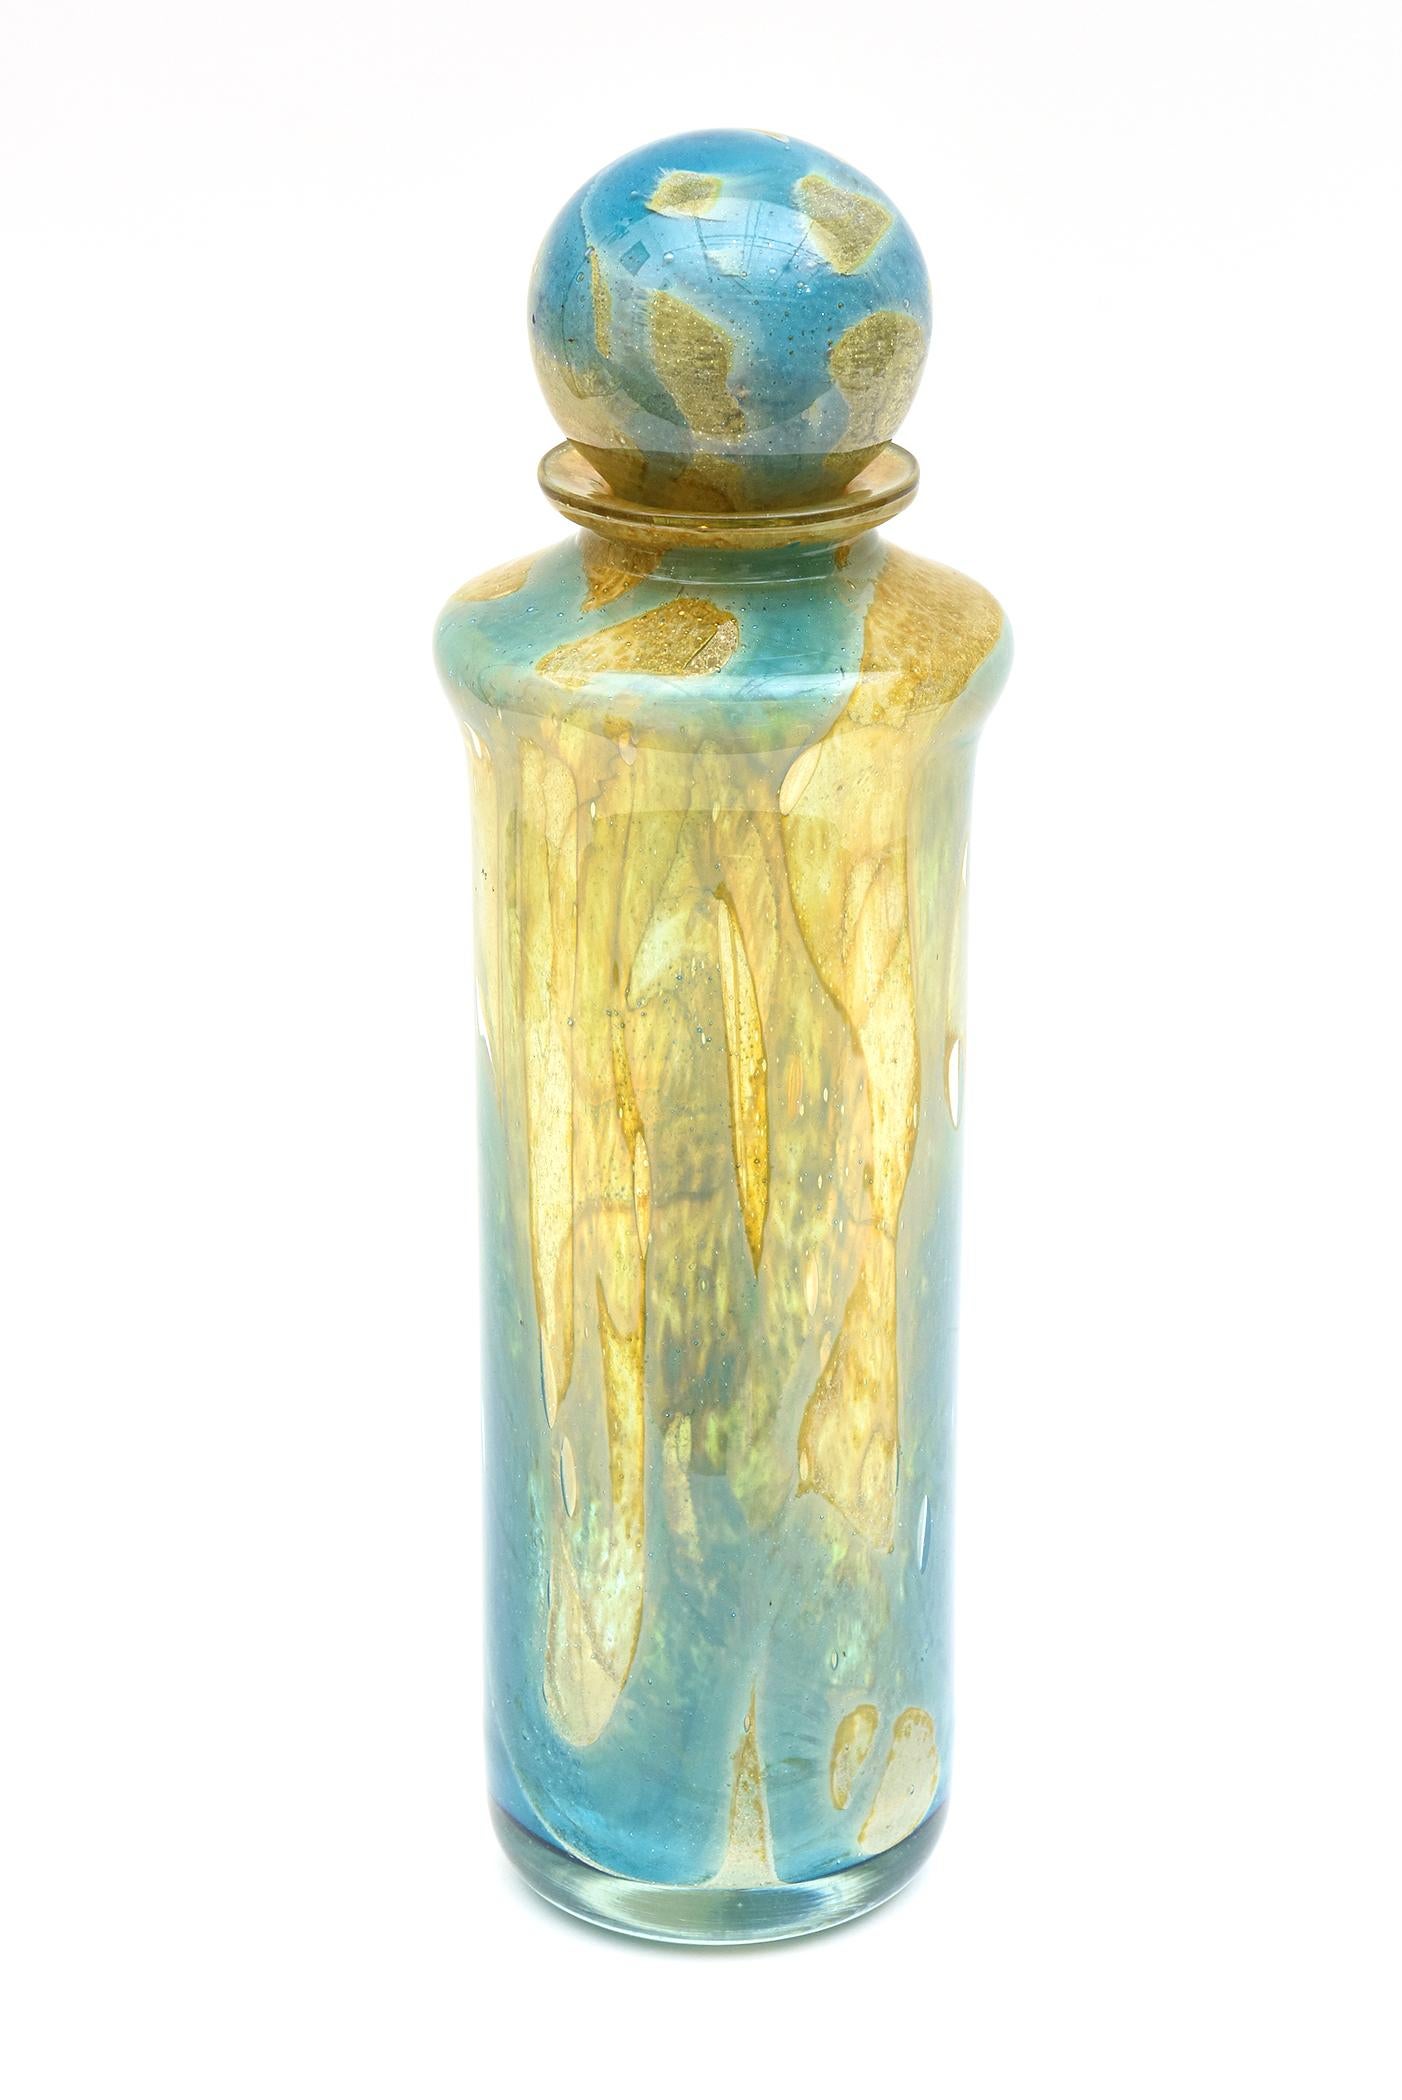 Mdina Malta Signed Vintage Turquoise, Yellow, Brown Blown Glass Decanter Bottle 5